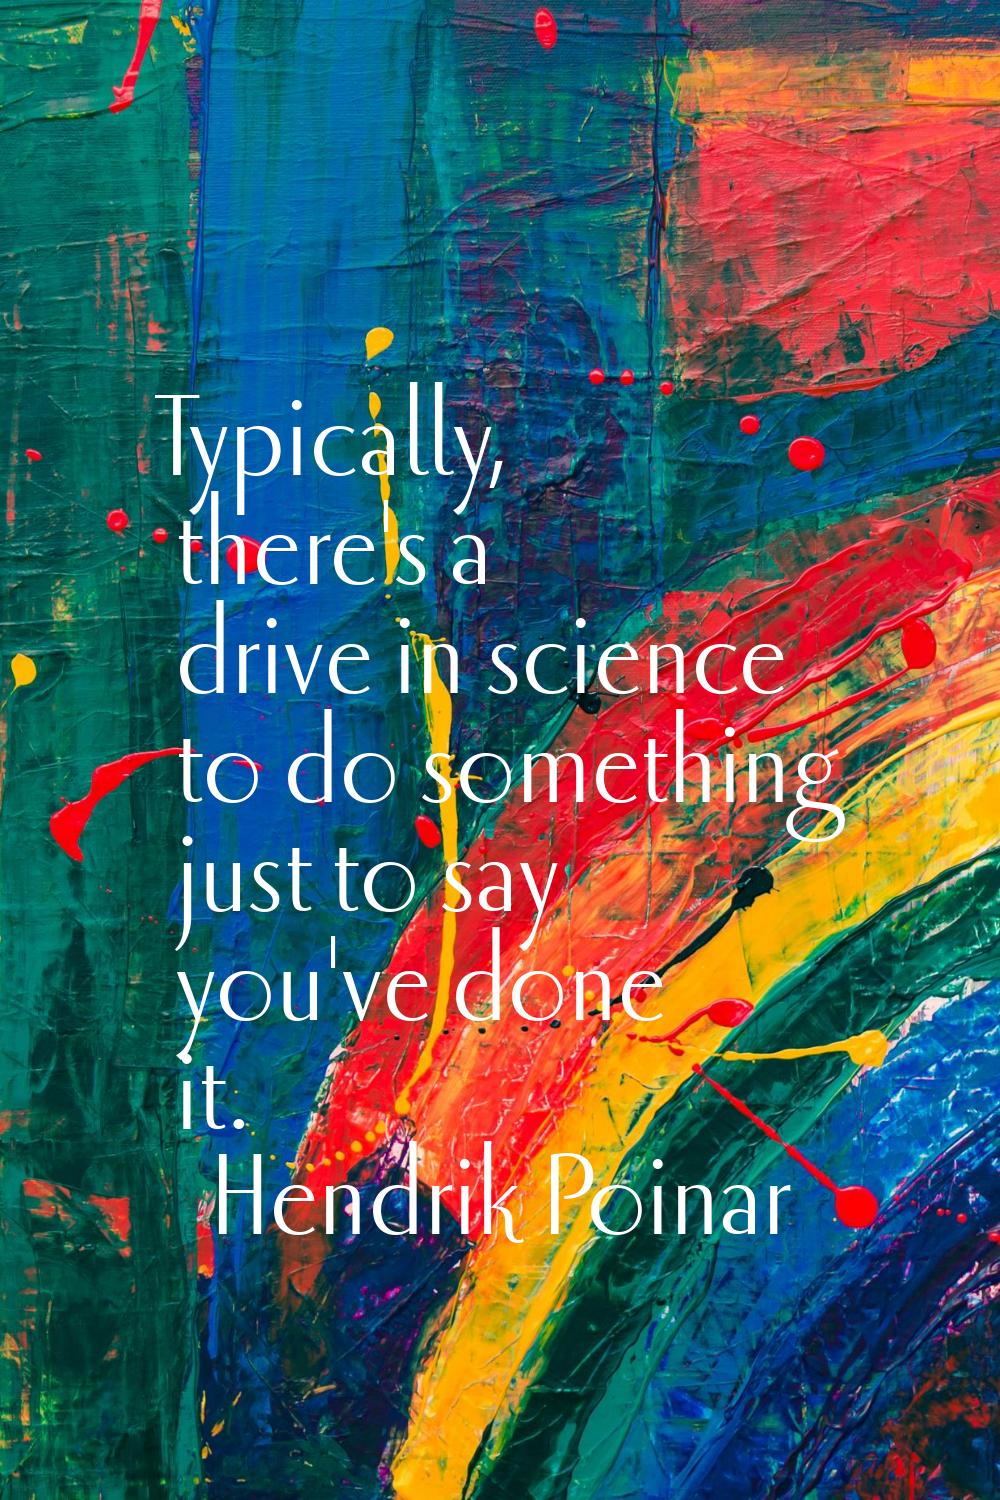 Typically, there's a drive in science to do something just to say you've done it.